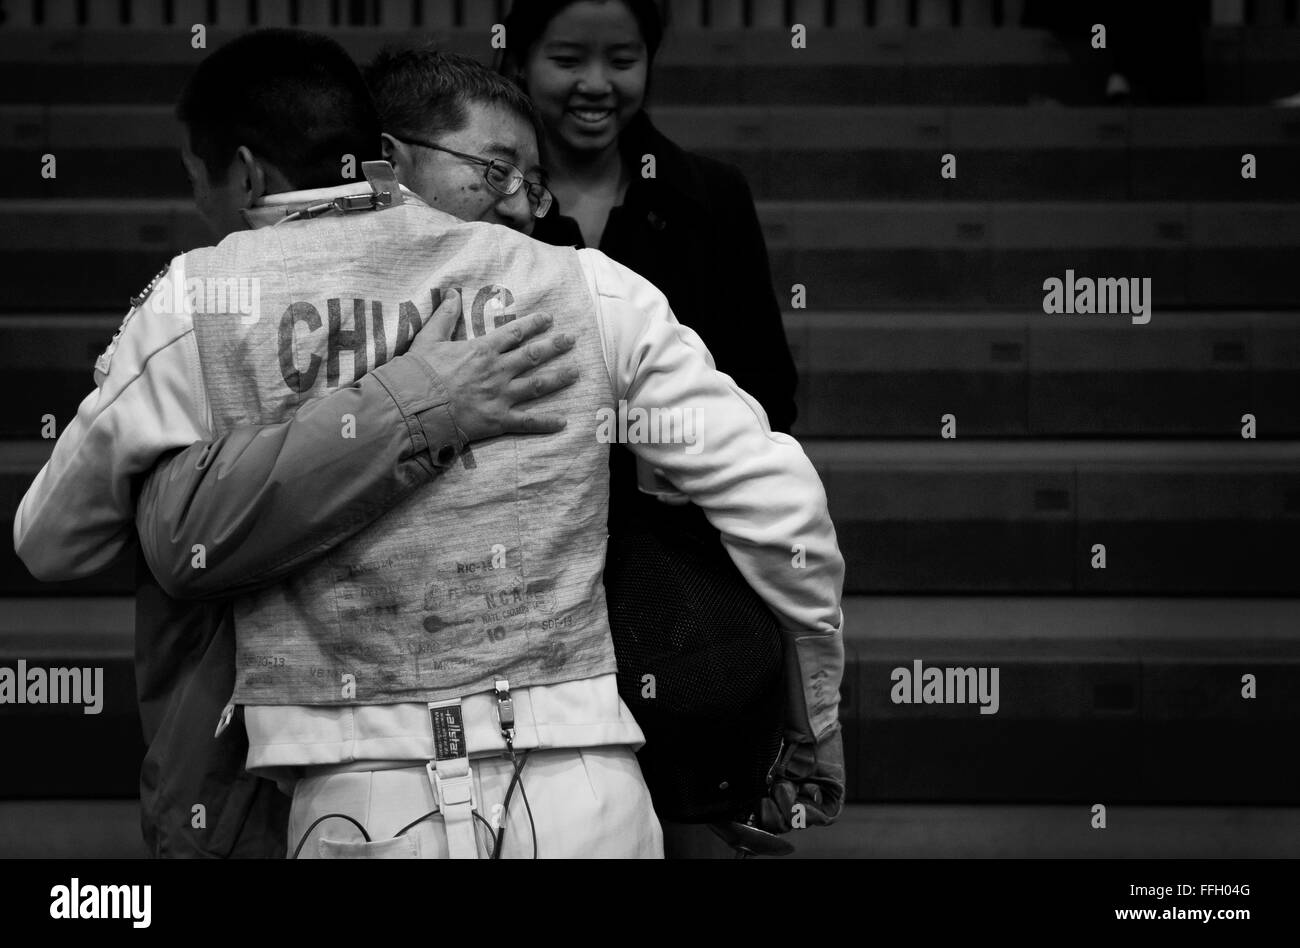 After seeing his family arrive to watch him compete, Alexander Chiang gives his father a hug during warmups of the 2014 NCAA Fencing Championships at Ohio State University. Chiang's family drove from Georgia to Ohio to watch him fence. Stock Photo